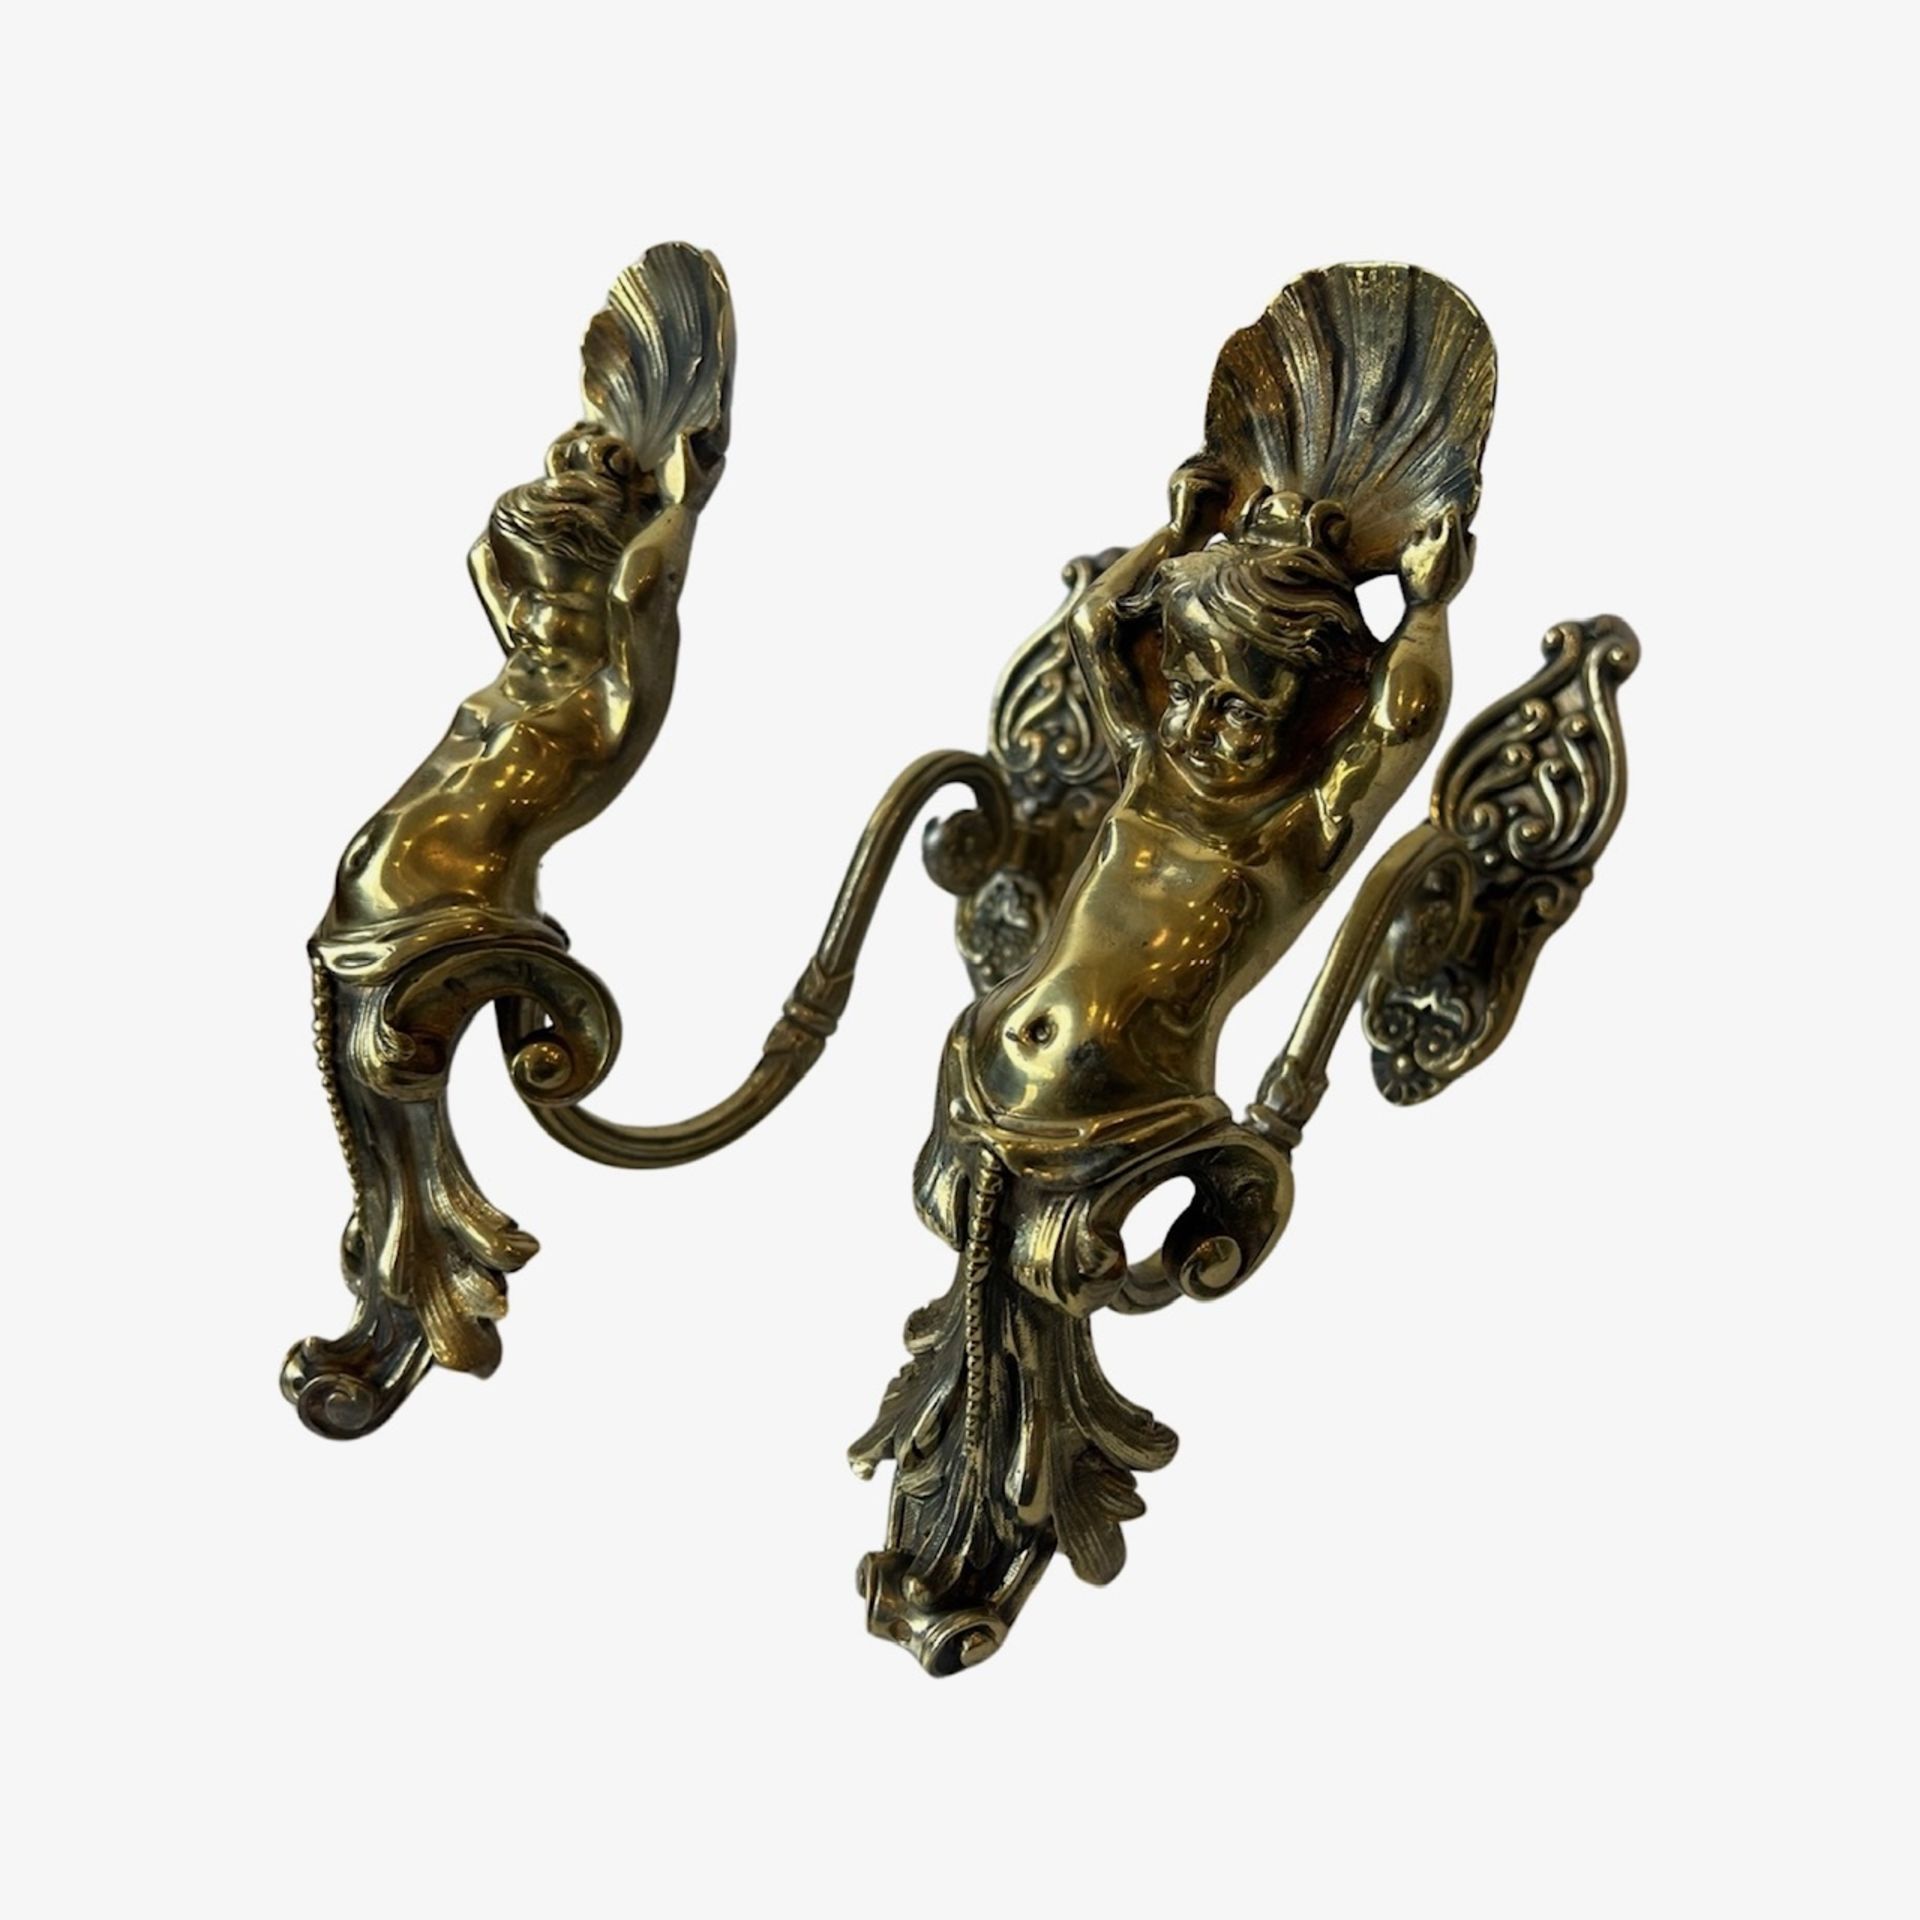 A PAIR OF LATE 19TH CENTURY FRENCH BRONZE CURTAIN TIE BACKS - Image 5 of 7